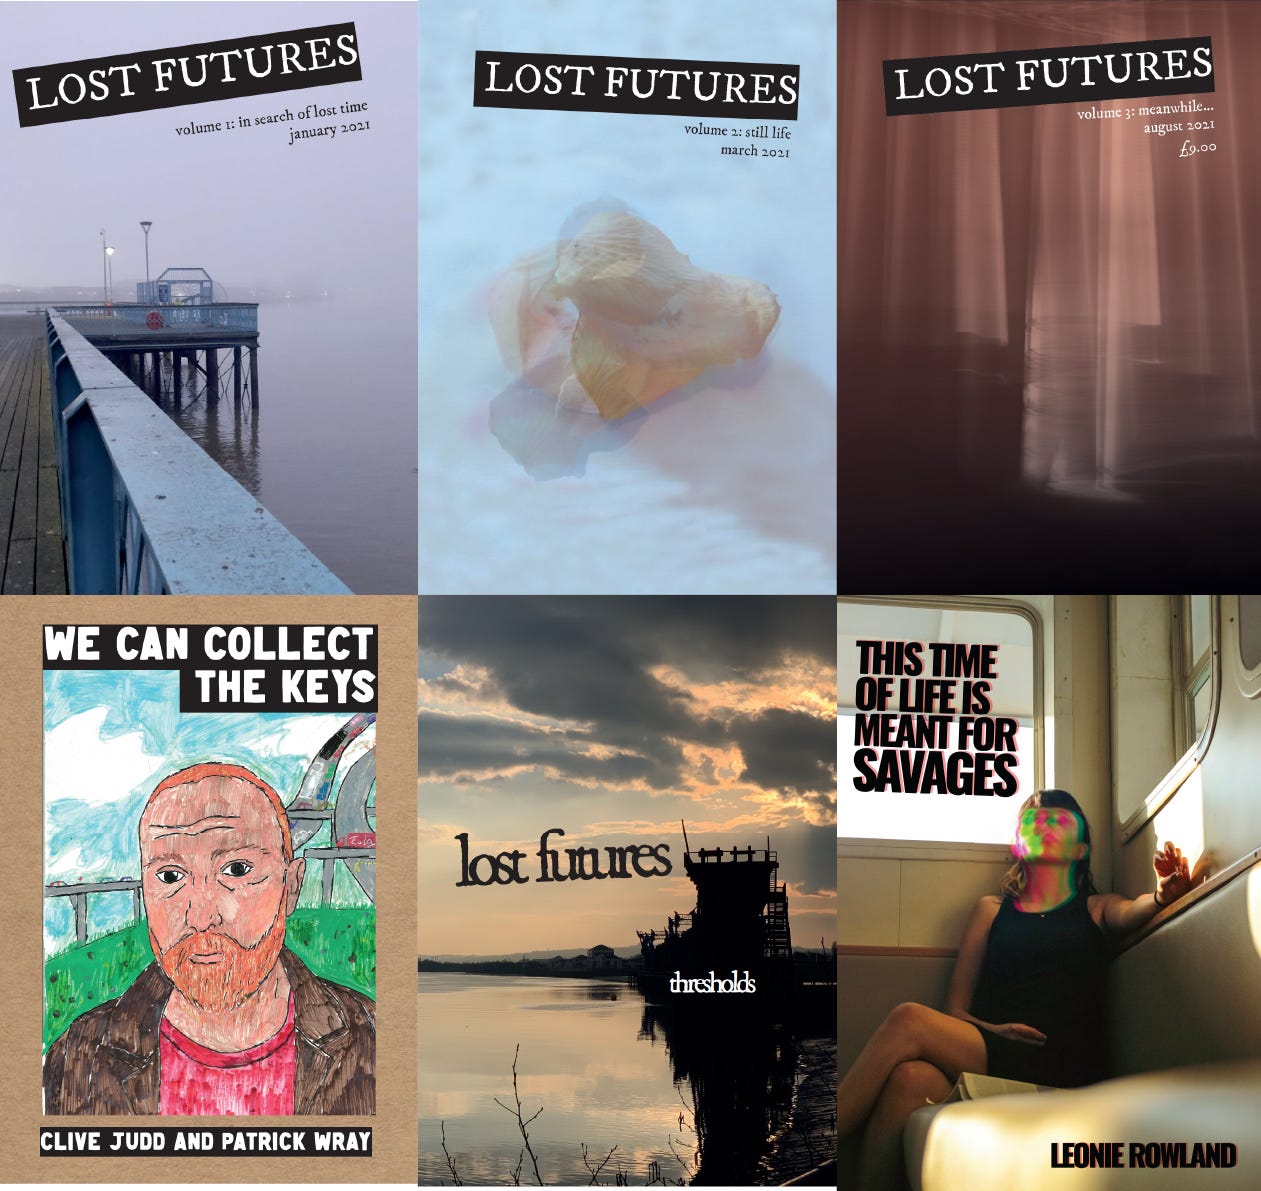 The covers of LOST FUTURES vol 1—4, We can collect the keys, and This Time of Life is Meant for Savages.